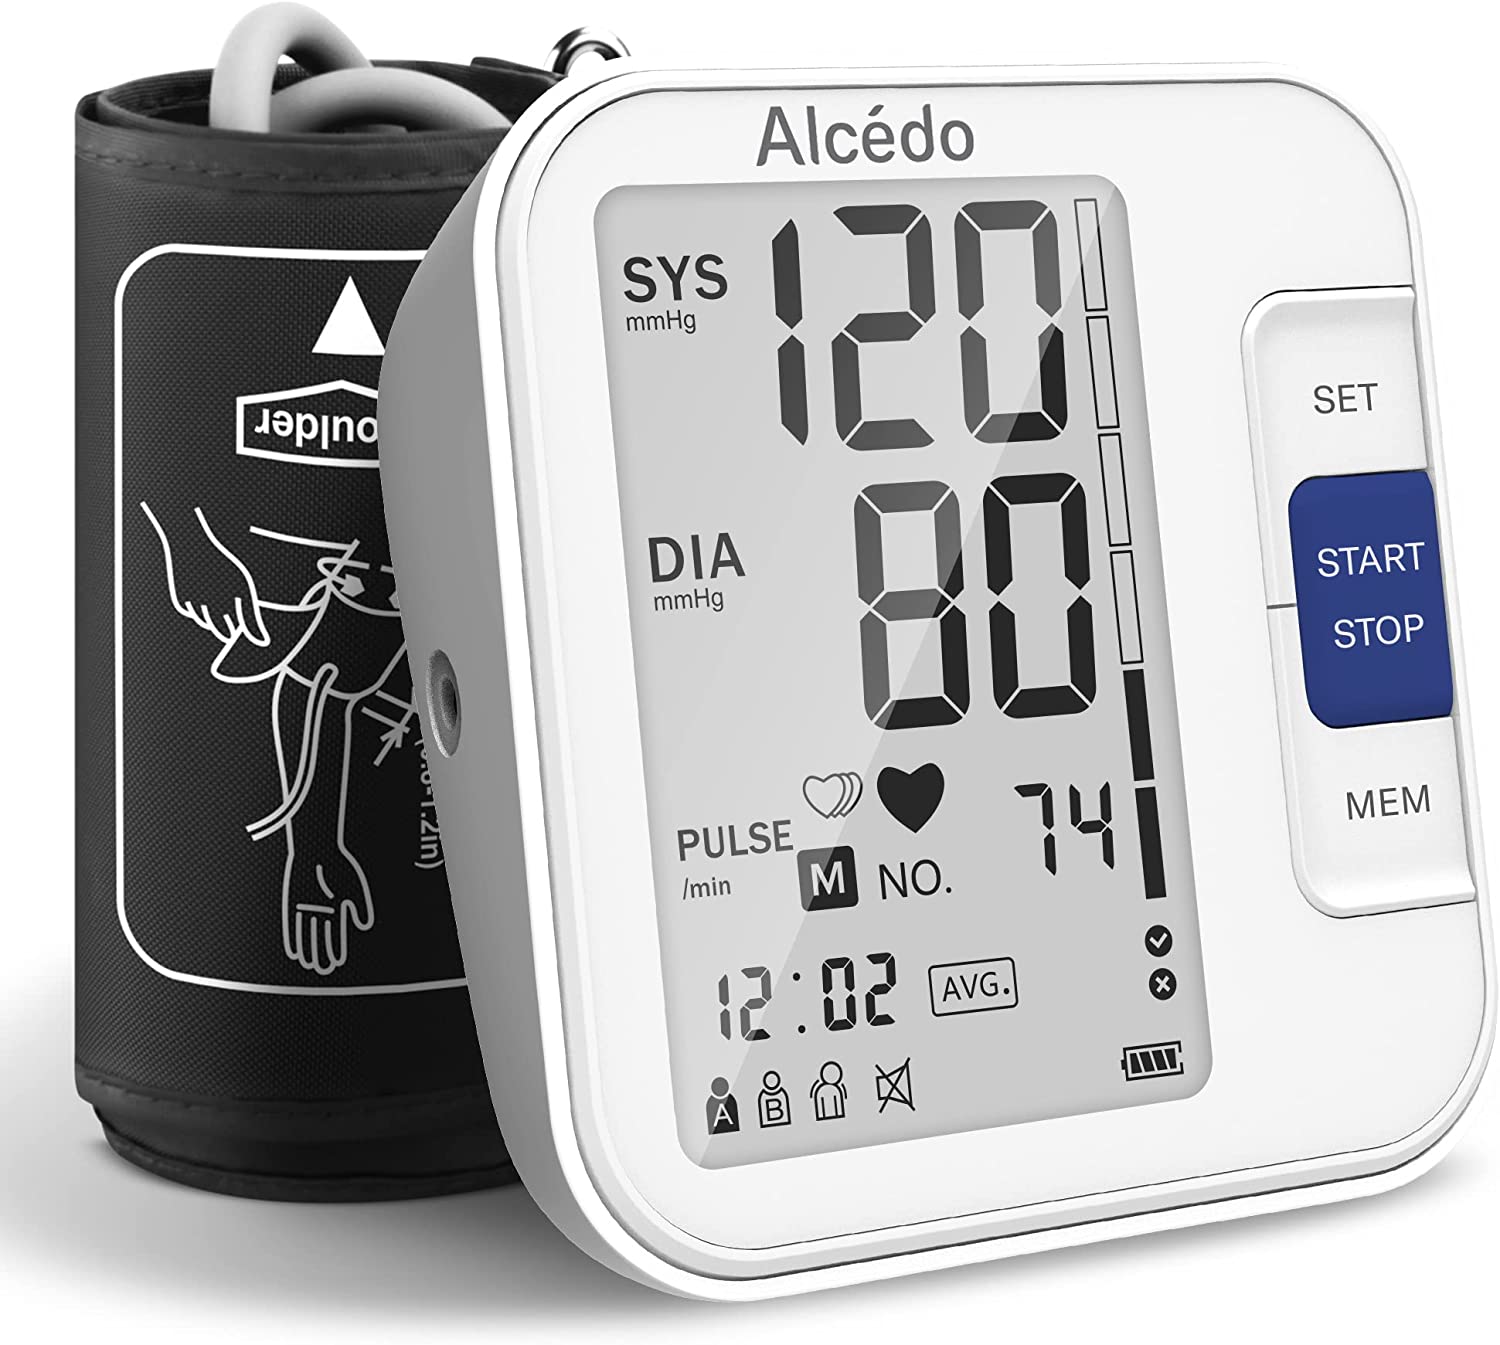 Alcedo Blood Pressure Monitor for Home Use, Automatic [...]